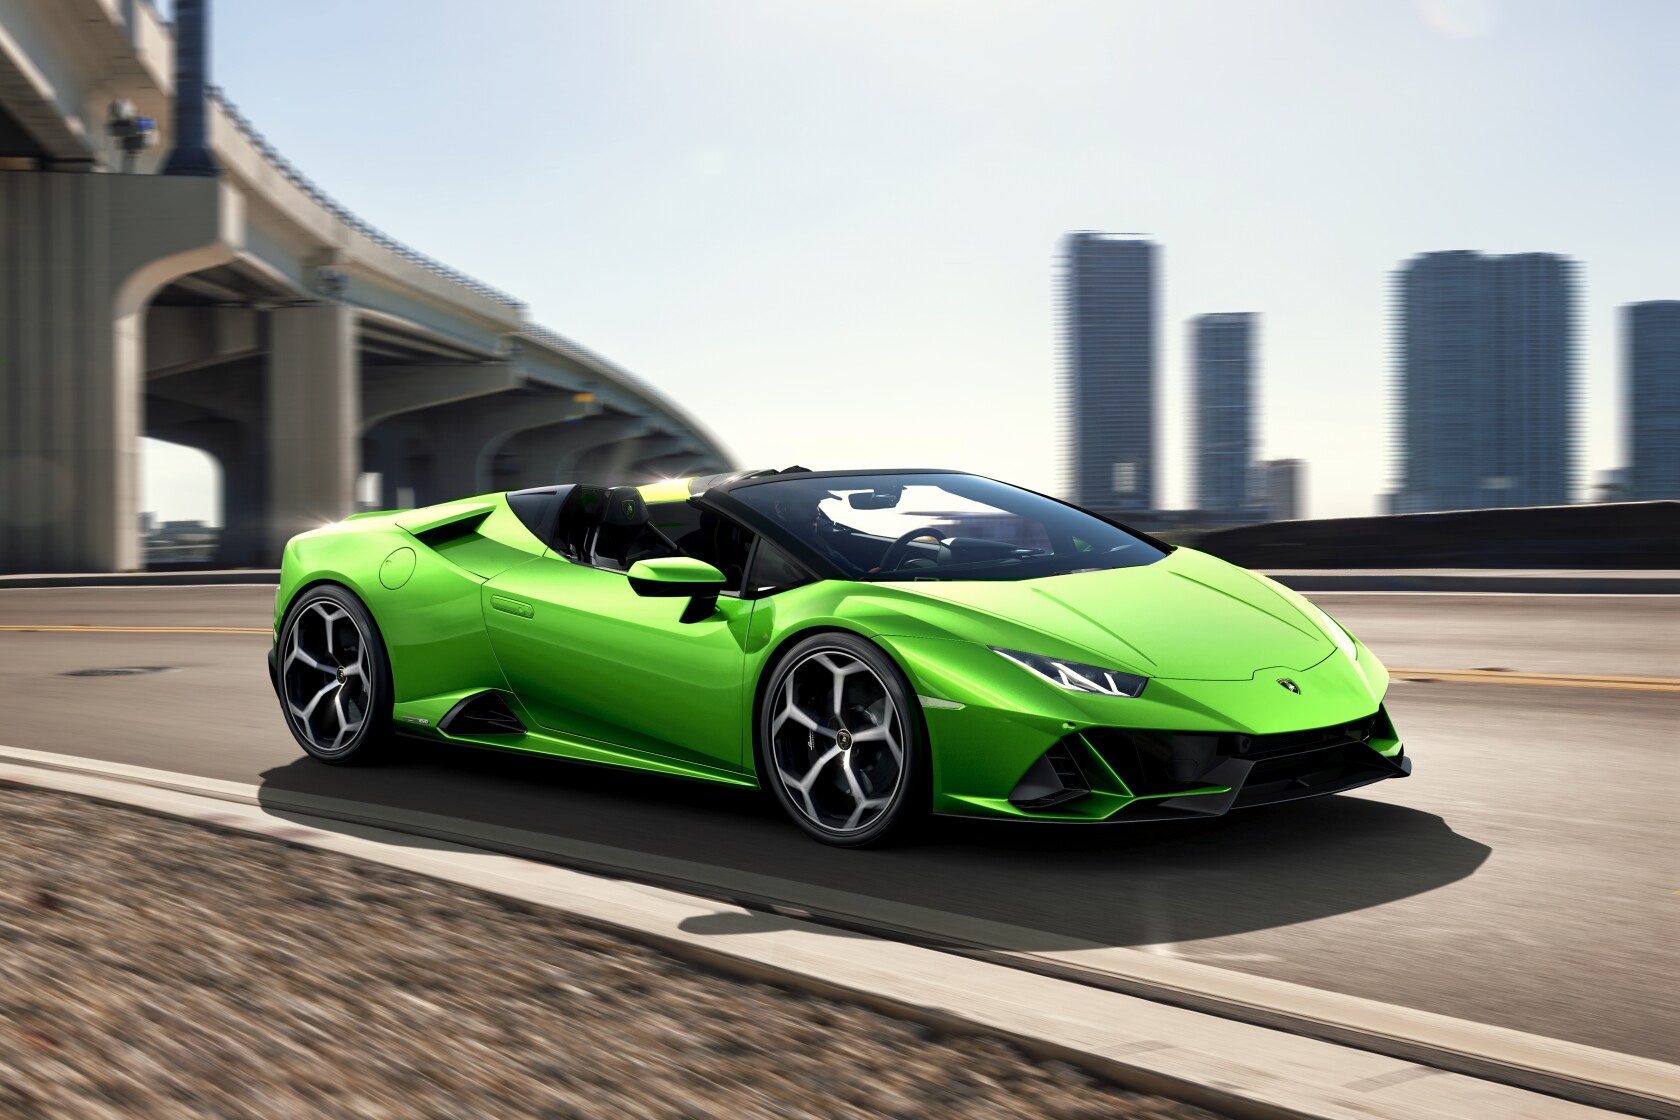 Lamborghini S 2020 Huracan Evo Is A Hell Of A Ride But